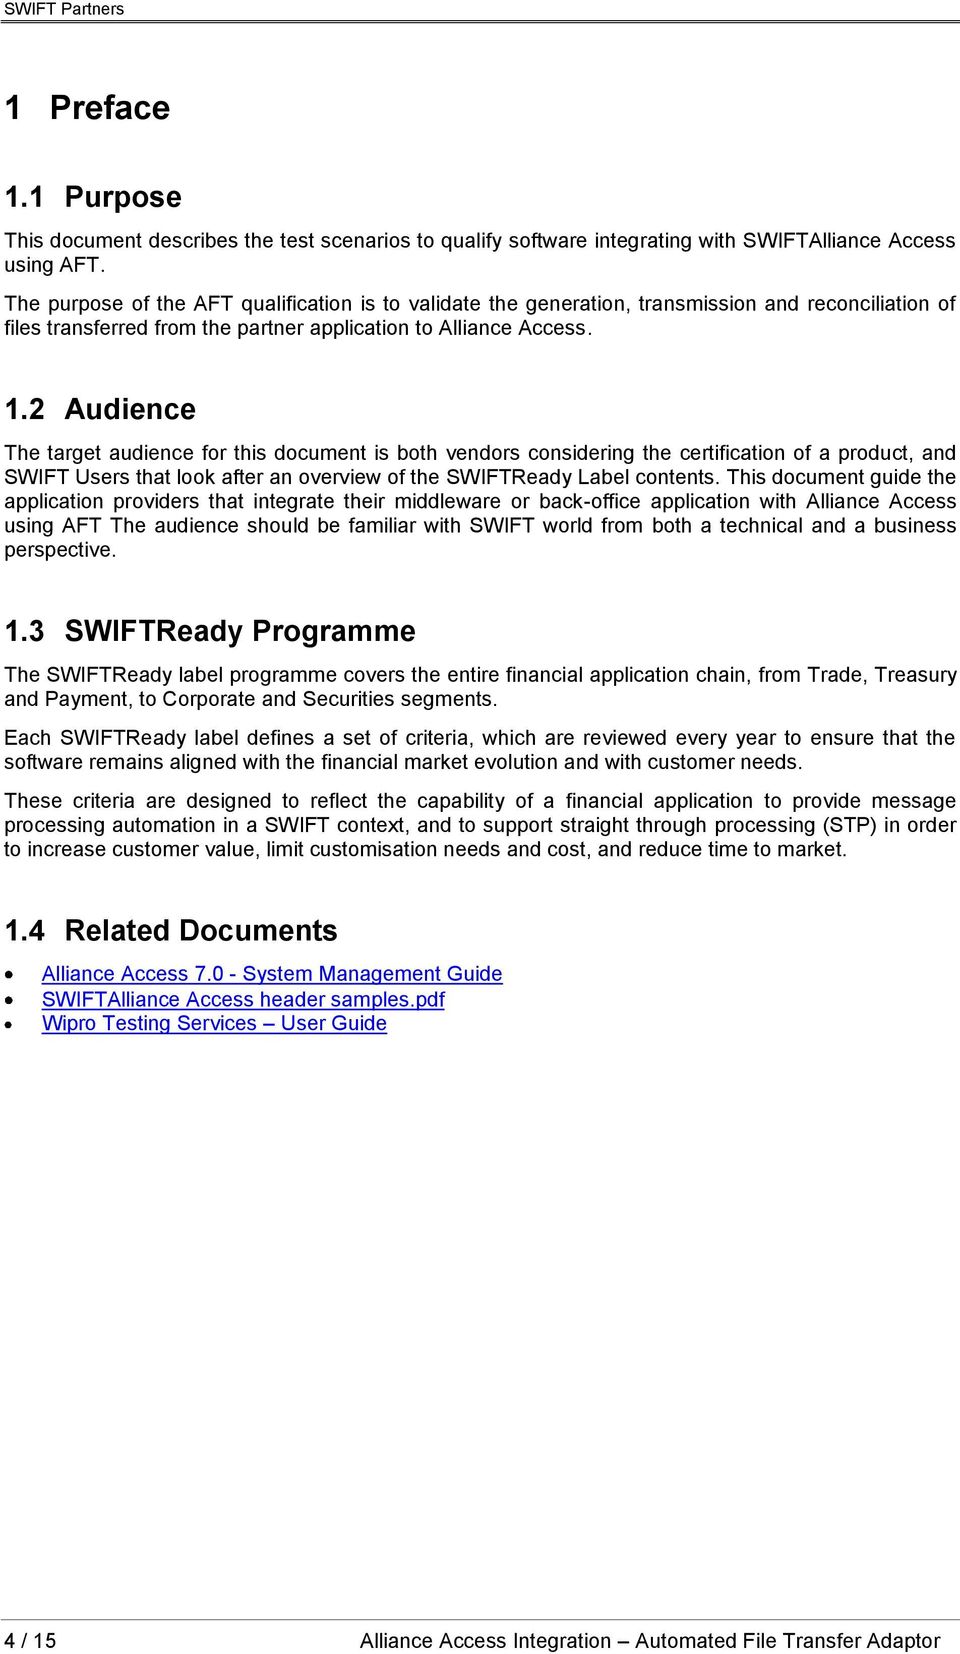 2 Audience The target audience for this document is both vendors considering the certification of a product, and SWIFT Users that look after an overview of the SWIFTReady Label contents.